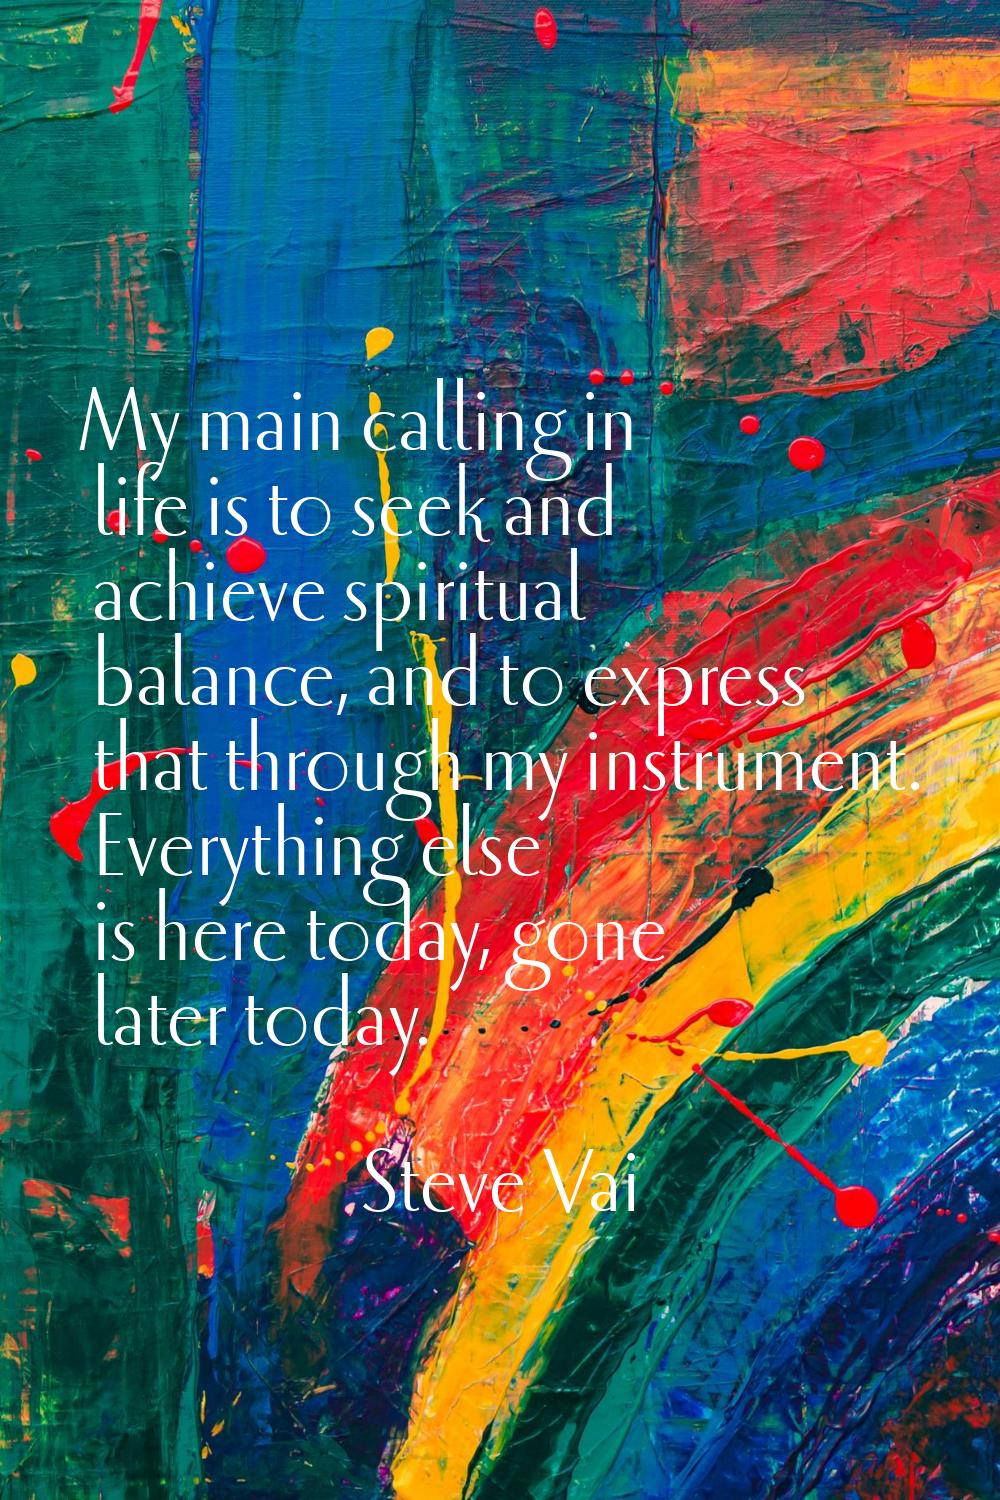 My main calling in life is to seek and achieve spiritual balance, and to express that through my in